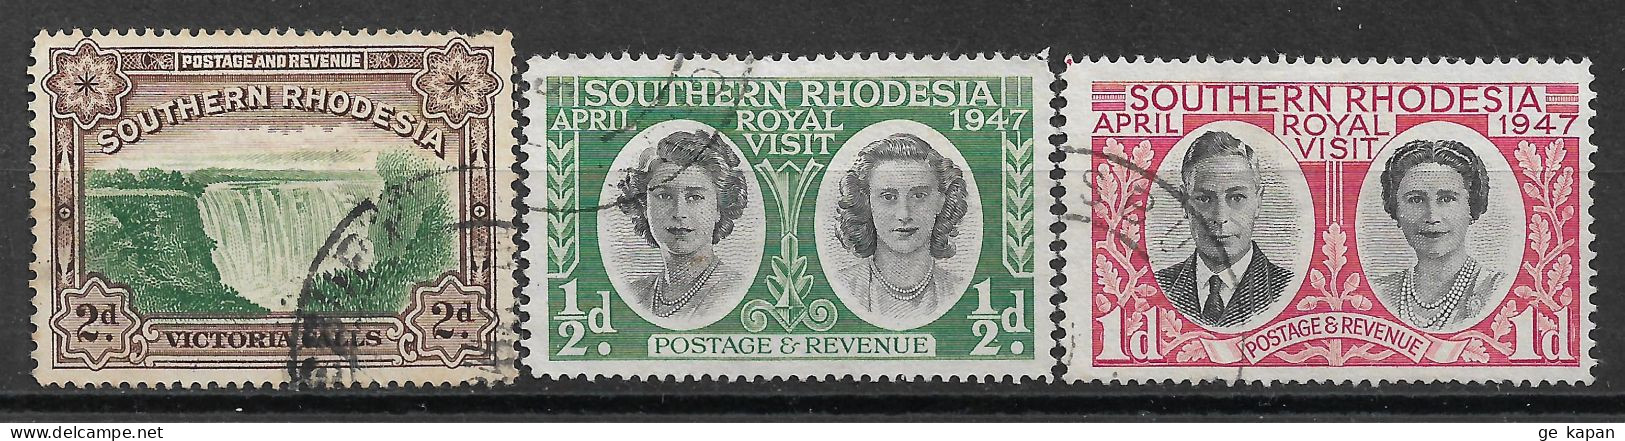 1932,1947 SOUTHERN RHODESIA Set Of 3 USED STAMPS (Michel # 30,64,65) - Southern Rhodesia (...-1964)